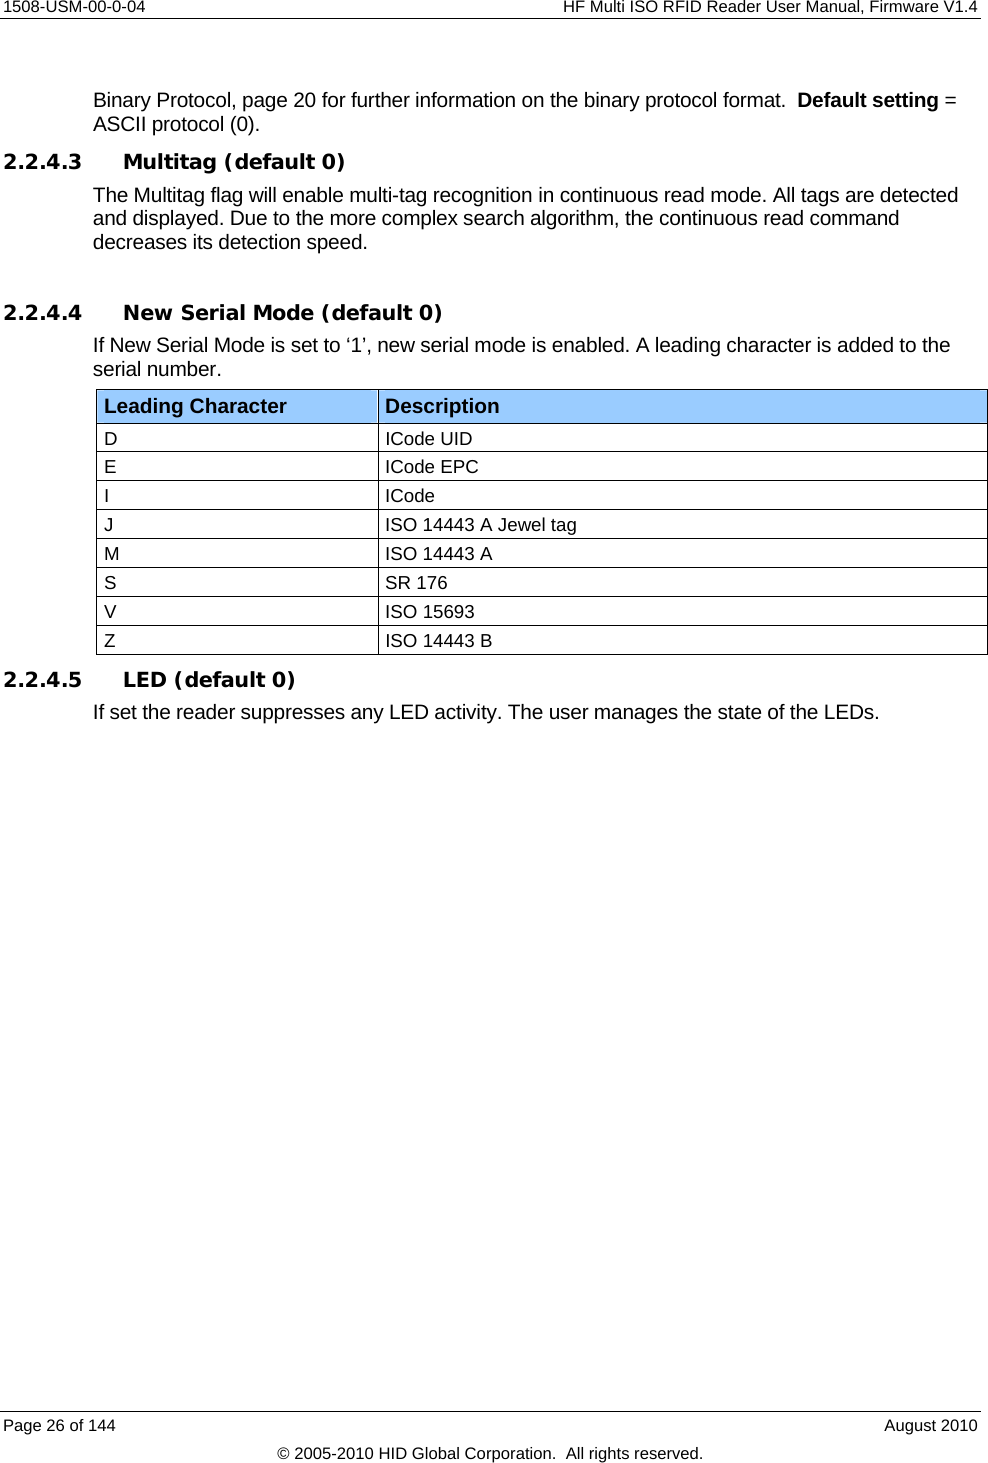     1508-USM-00-0-04    HF Multi ISO RFID Reader User Manual, Firmware V1.4  Binary Protocol, page 20 for further information on the binary protocol format.  Default setting = ASCII protocol (0). 2.2.4.3 Multitag (default 0) The Multitag flag will enable multi-tag recognition in continuous read mode. All tags are detected and displayed. Due to the more complex search algorithm, the continuous read command decreases its detection speed.   2.2.4.4 New Serial Mode (default 0) If New Serial Mode is set to ‘1’, new serial mode is enabled. A leading character is added to the serial number. Leading Character  Description D ICode UID E ICode EPC I ICode J  ISO 14443 A Jewel tag M  ISO 14443 A S SR 176 V ISO 15693 Z  ISO 14443 B 2.2.4.5 LED (default 0) If set the reader suppresses any LED activity. The user manages the state of the LEDs. Page 26 of 144    August 2010 © 2005-2010 HID Global Corporation.  All rights reserved. 